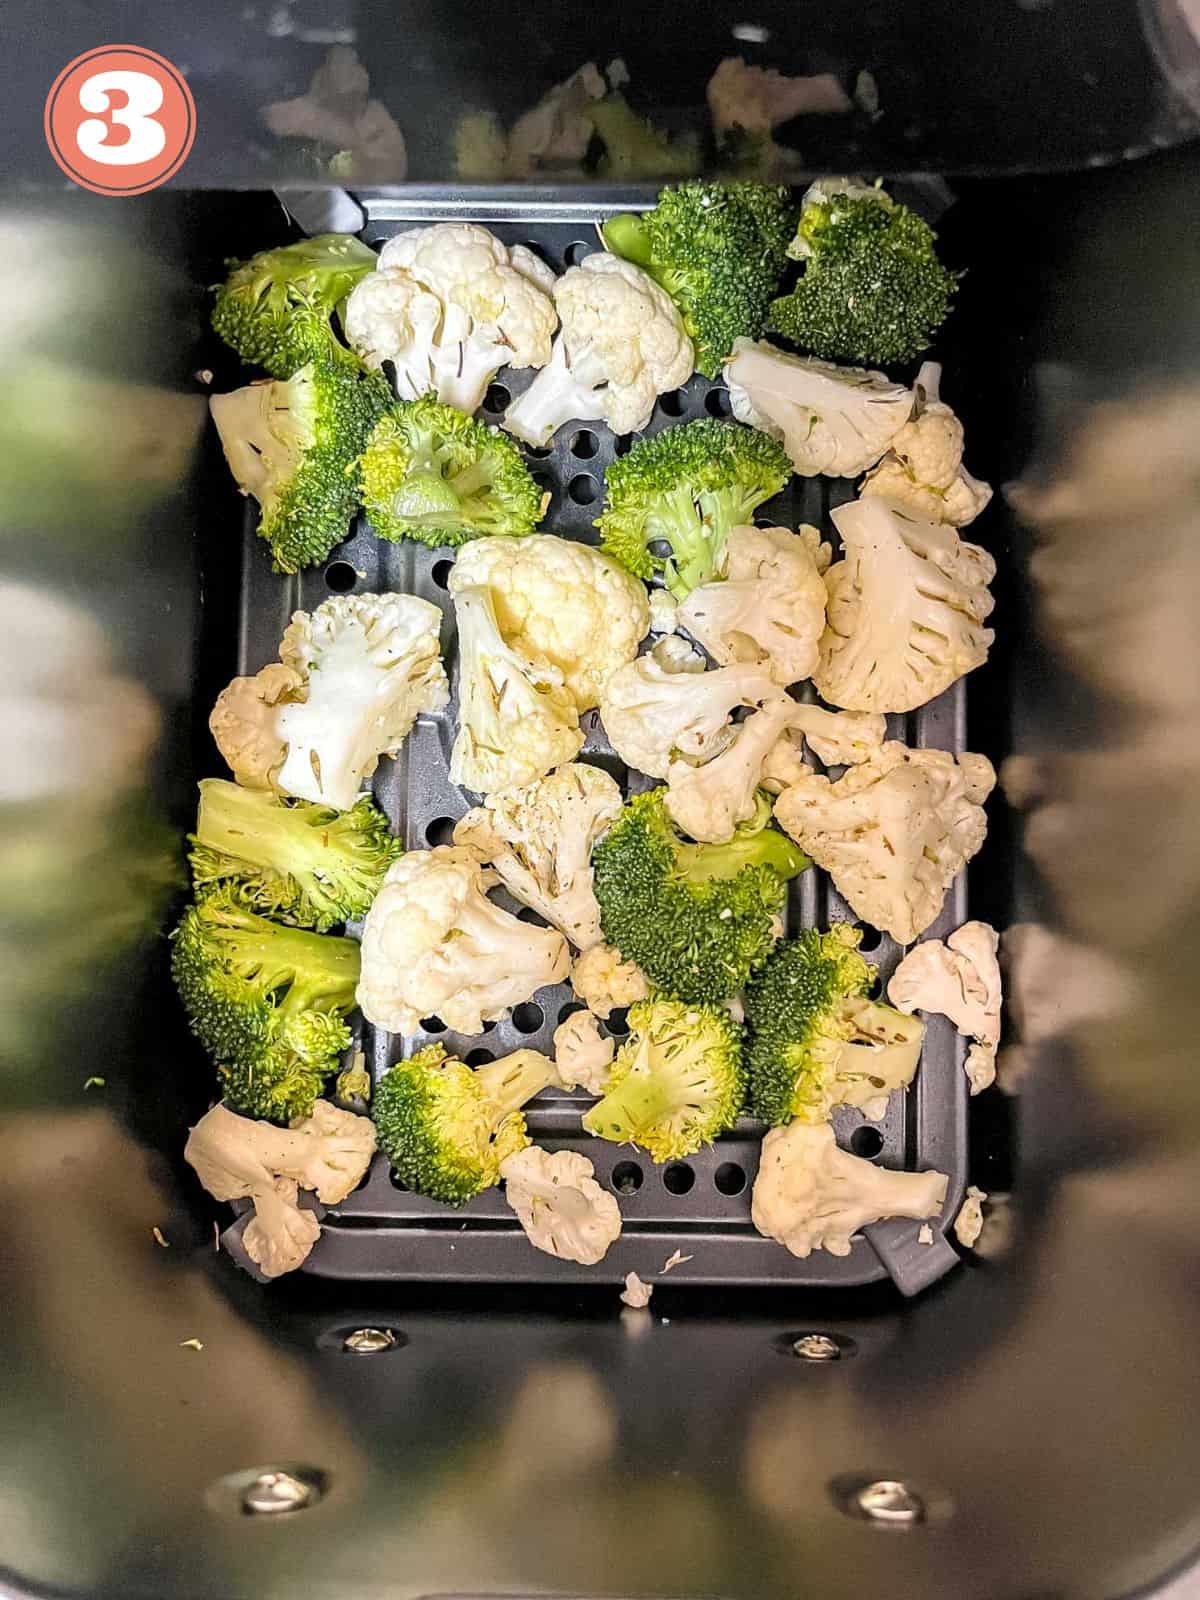 broccoli and cauliflower florets in an air fryer labelled number three.